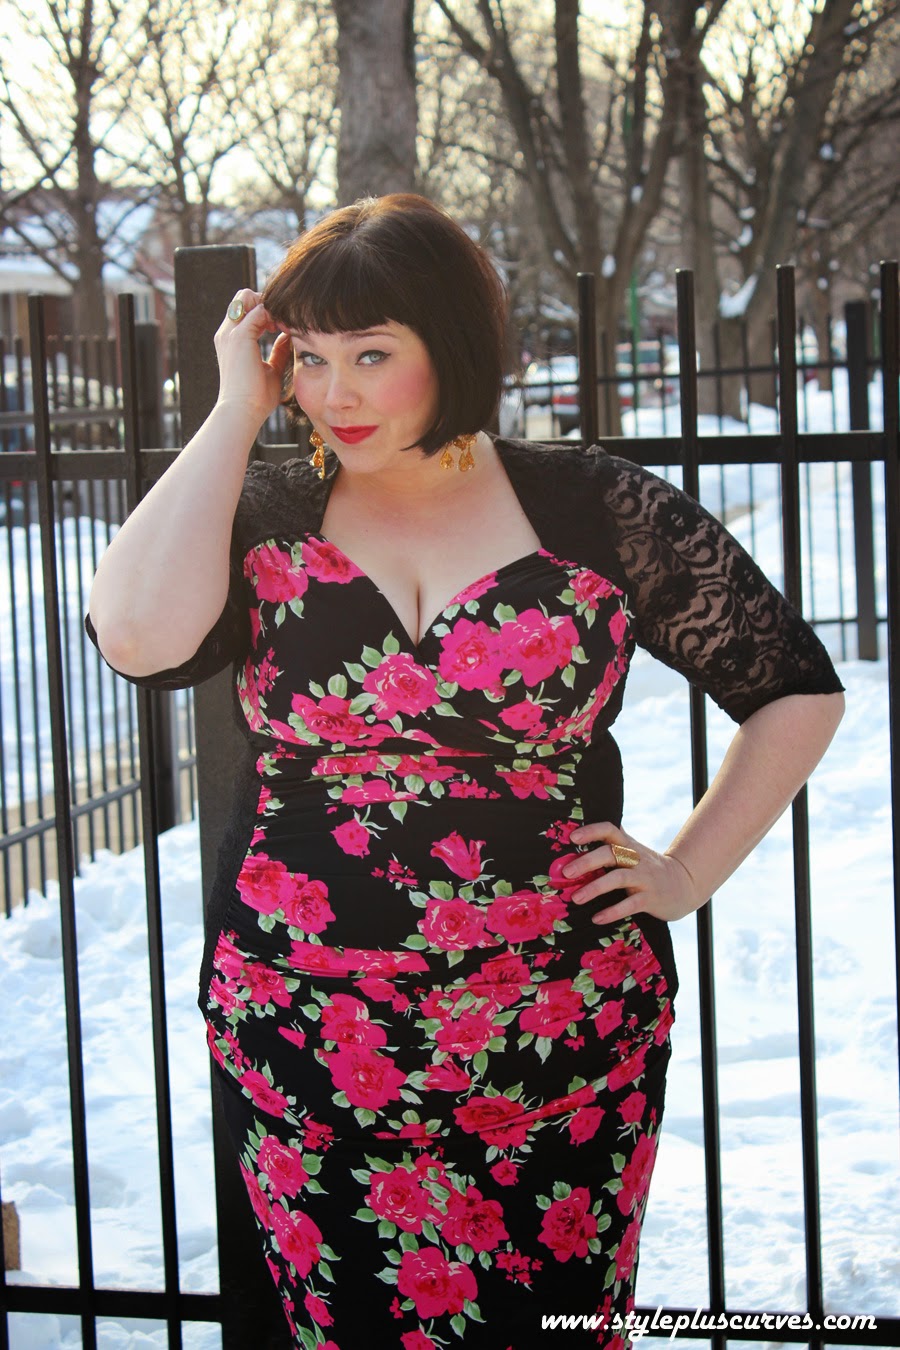 Plus Size Floral And Lace Dress From Kiyonna Is Vava Voom